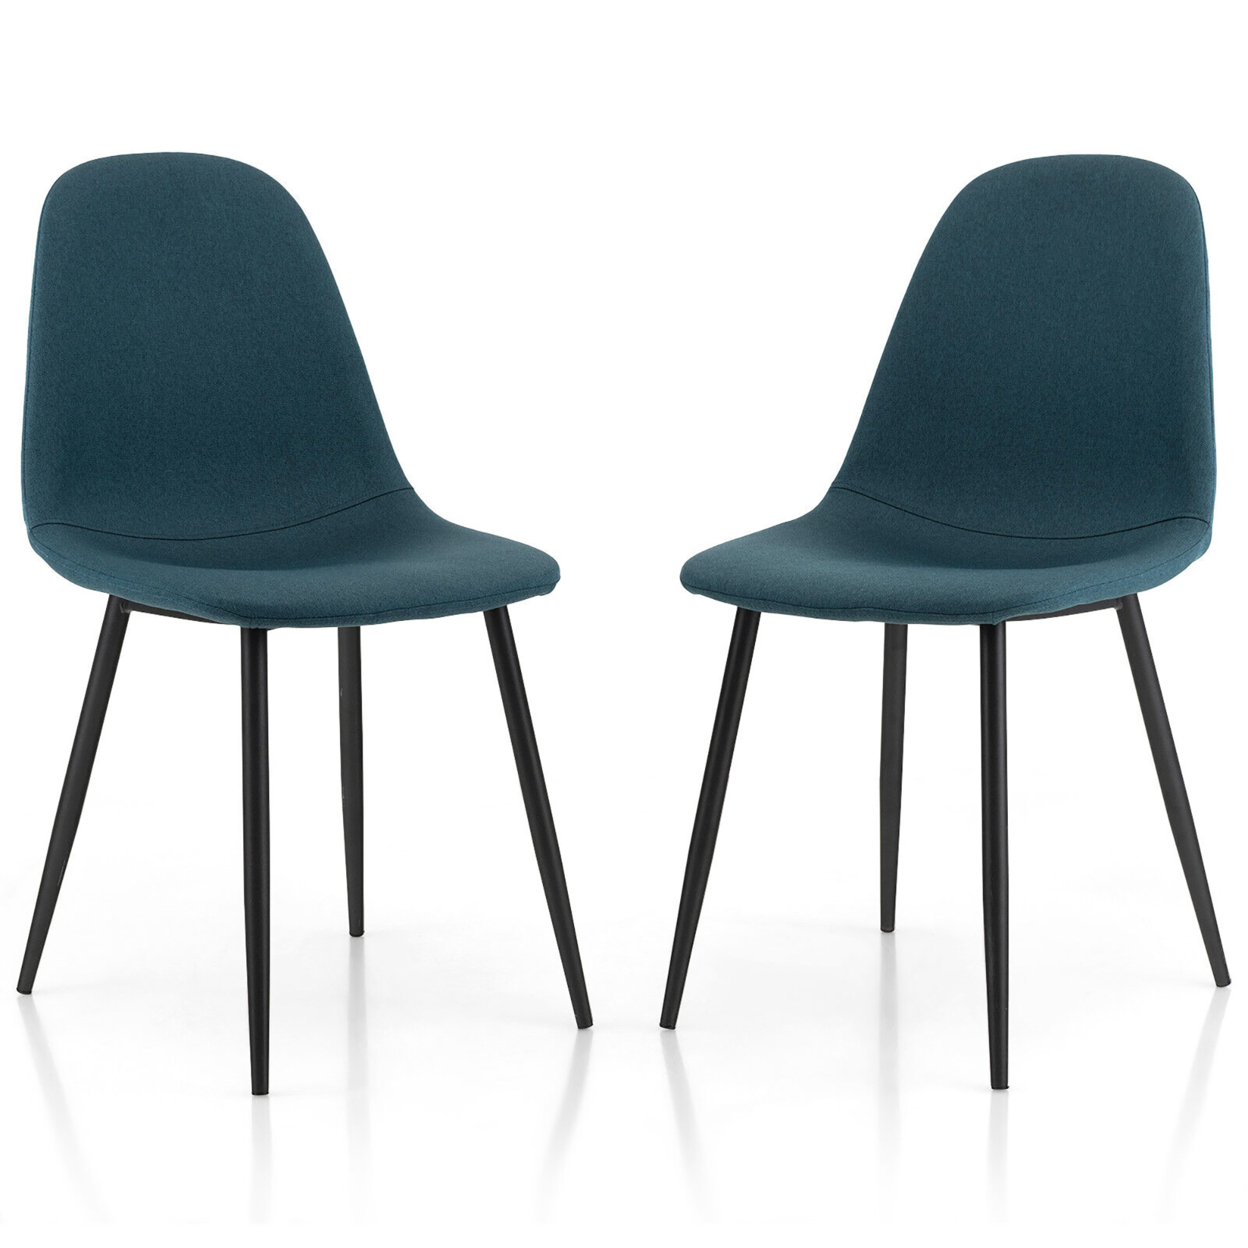 Dining Chairs Set Of 2 Upholstered Fabric Chairs W/Metal Legs For Living Room - Blue